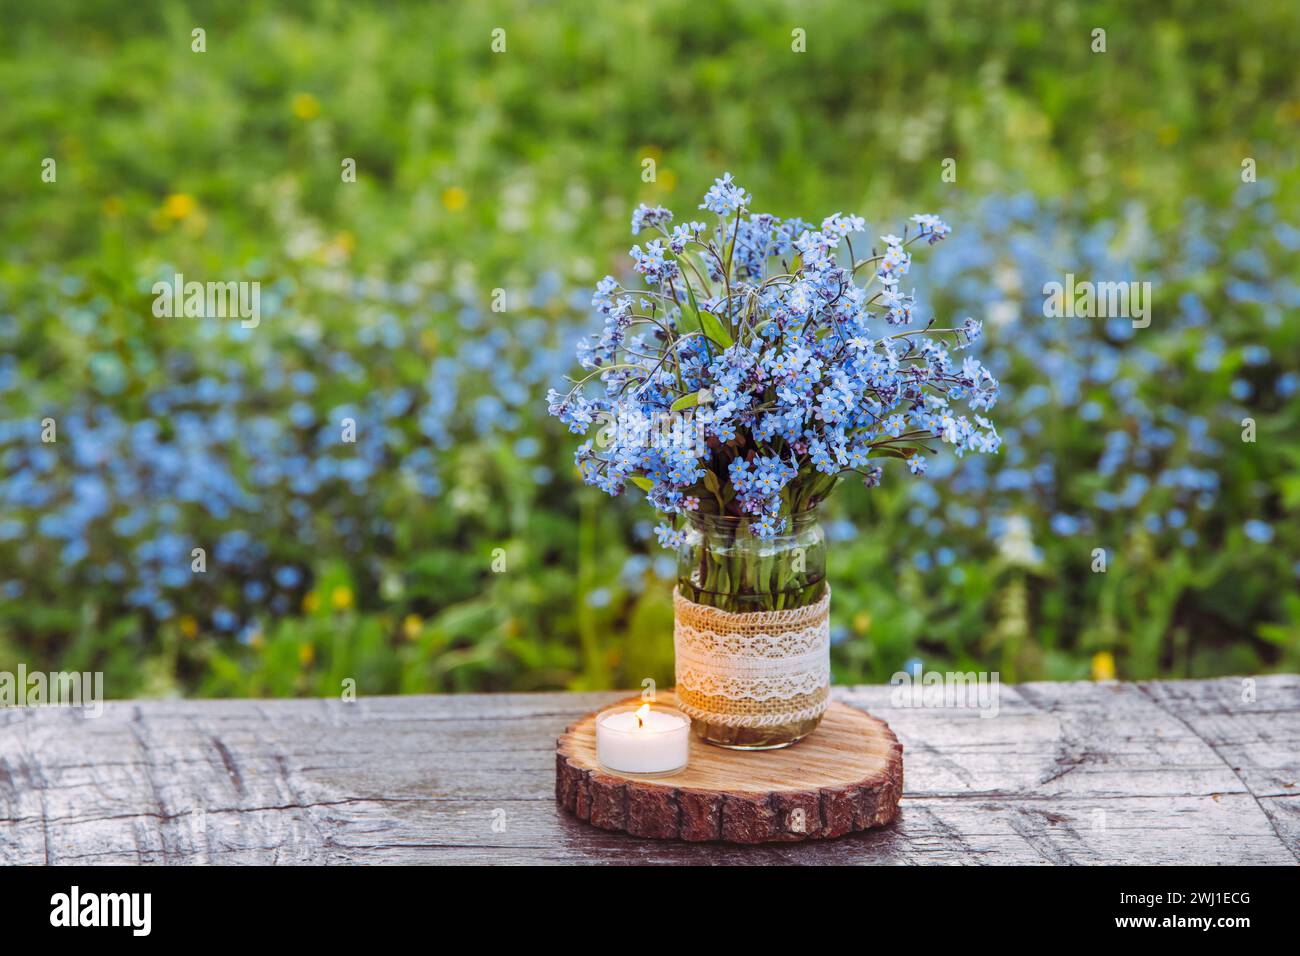 Bouquet of blue blossom wild flowers Myosotis also known as Forget me not or scorpion grasses in decorated mason jar. Beautiful vintage floral still. Stock Photo